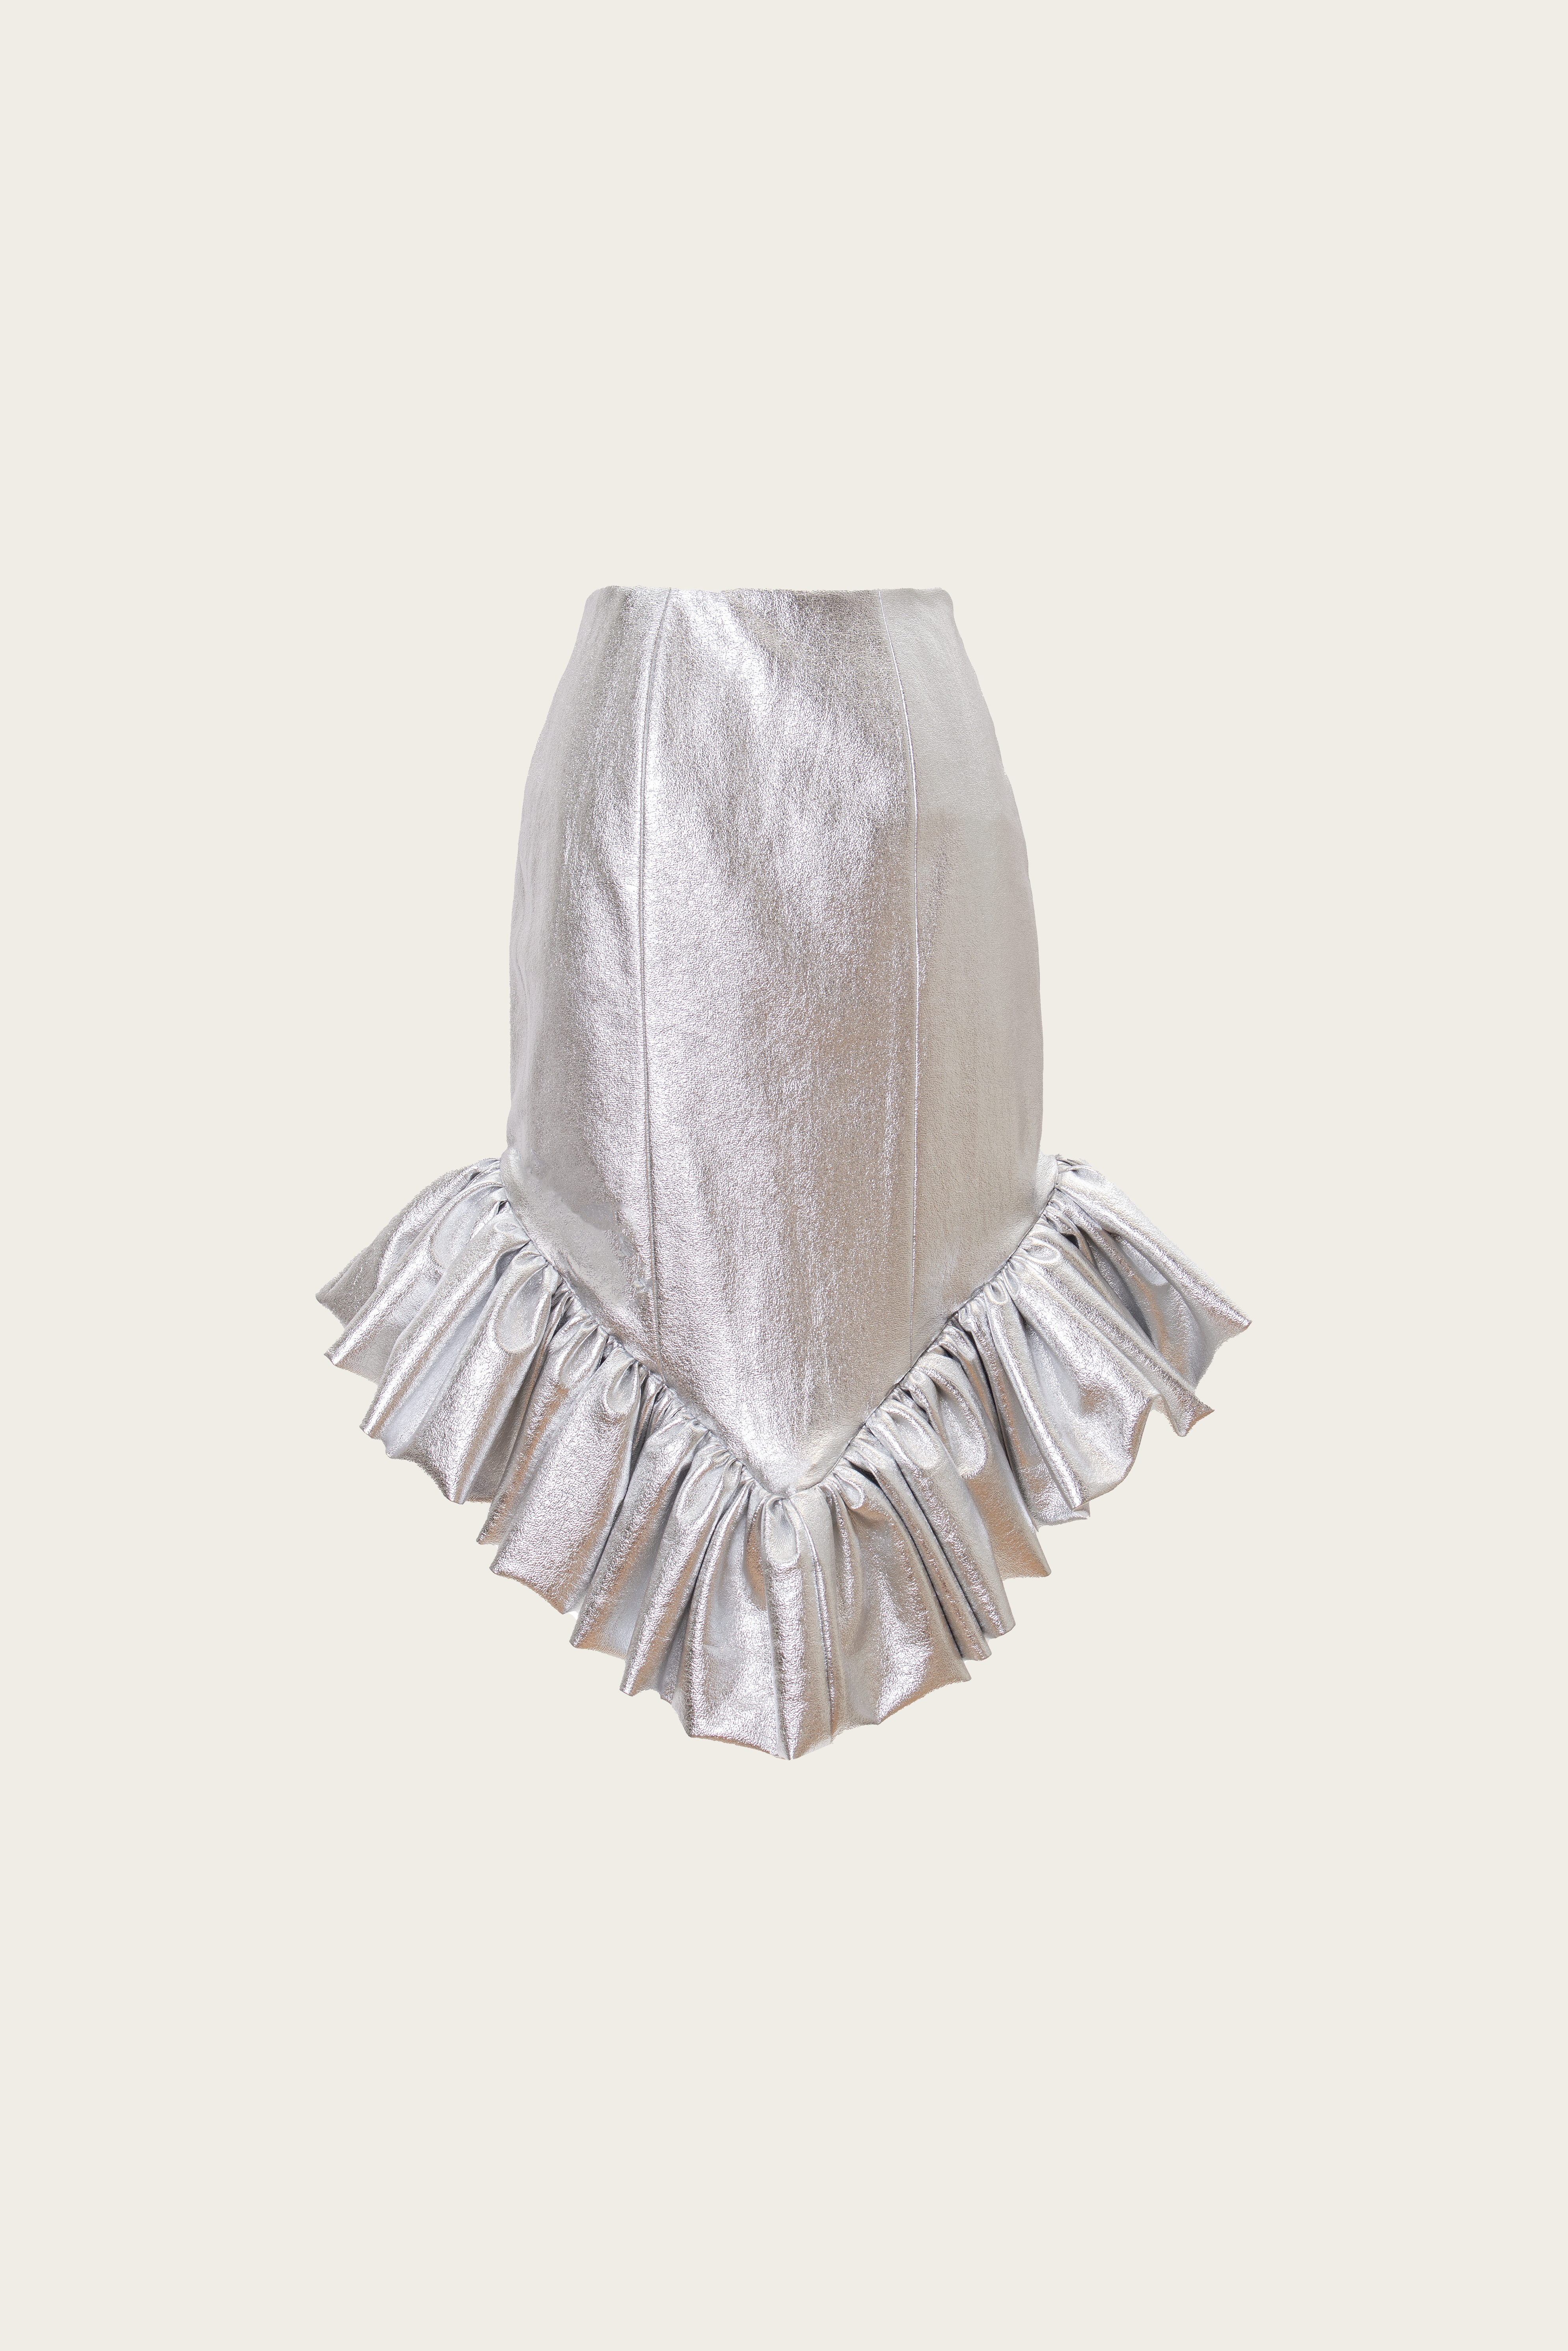 THE COQUILLAGE DES SABLES SKIRT